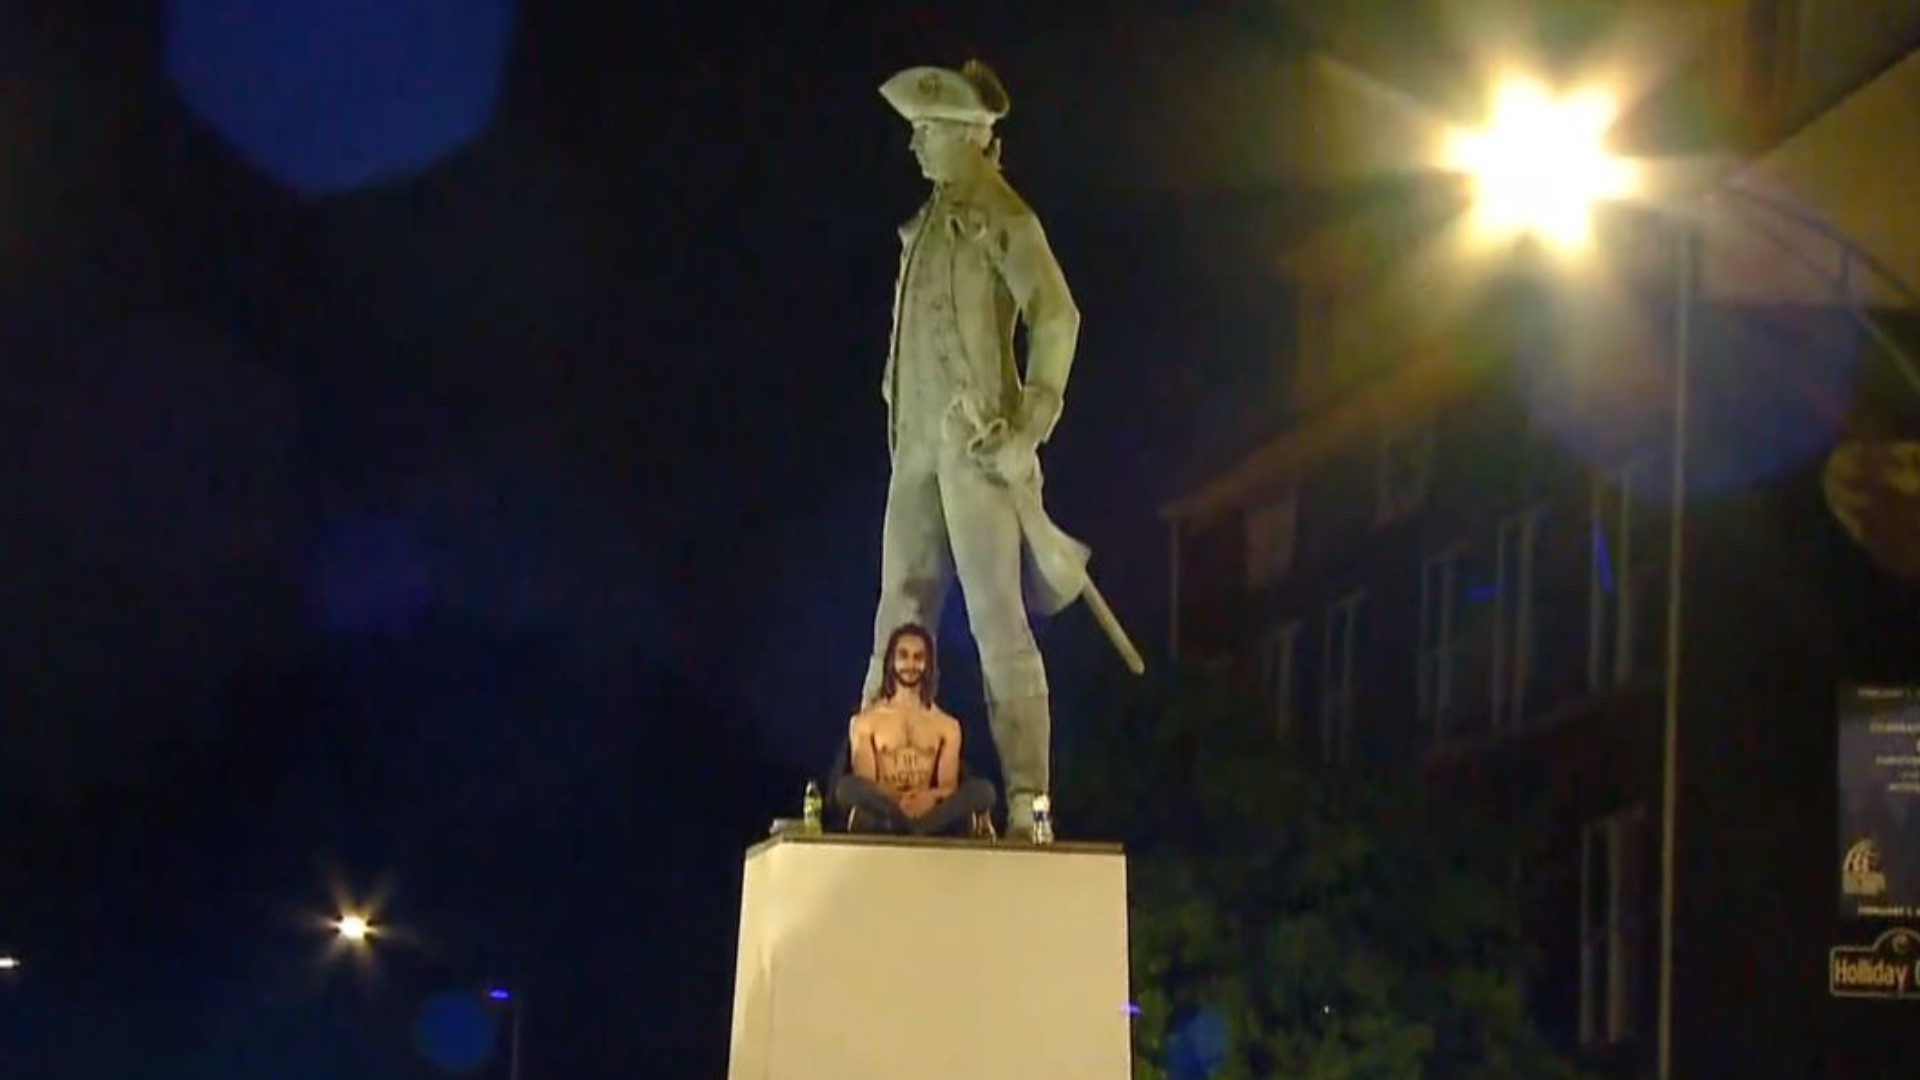 A protester was removed by the fire department after climbing a statue in downtown Greensboro. That's after a protest was dispersed following a citywide curfew.